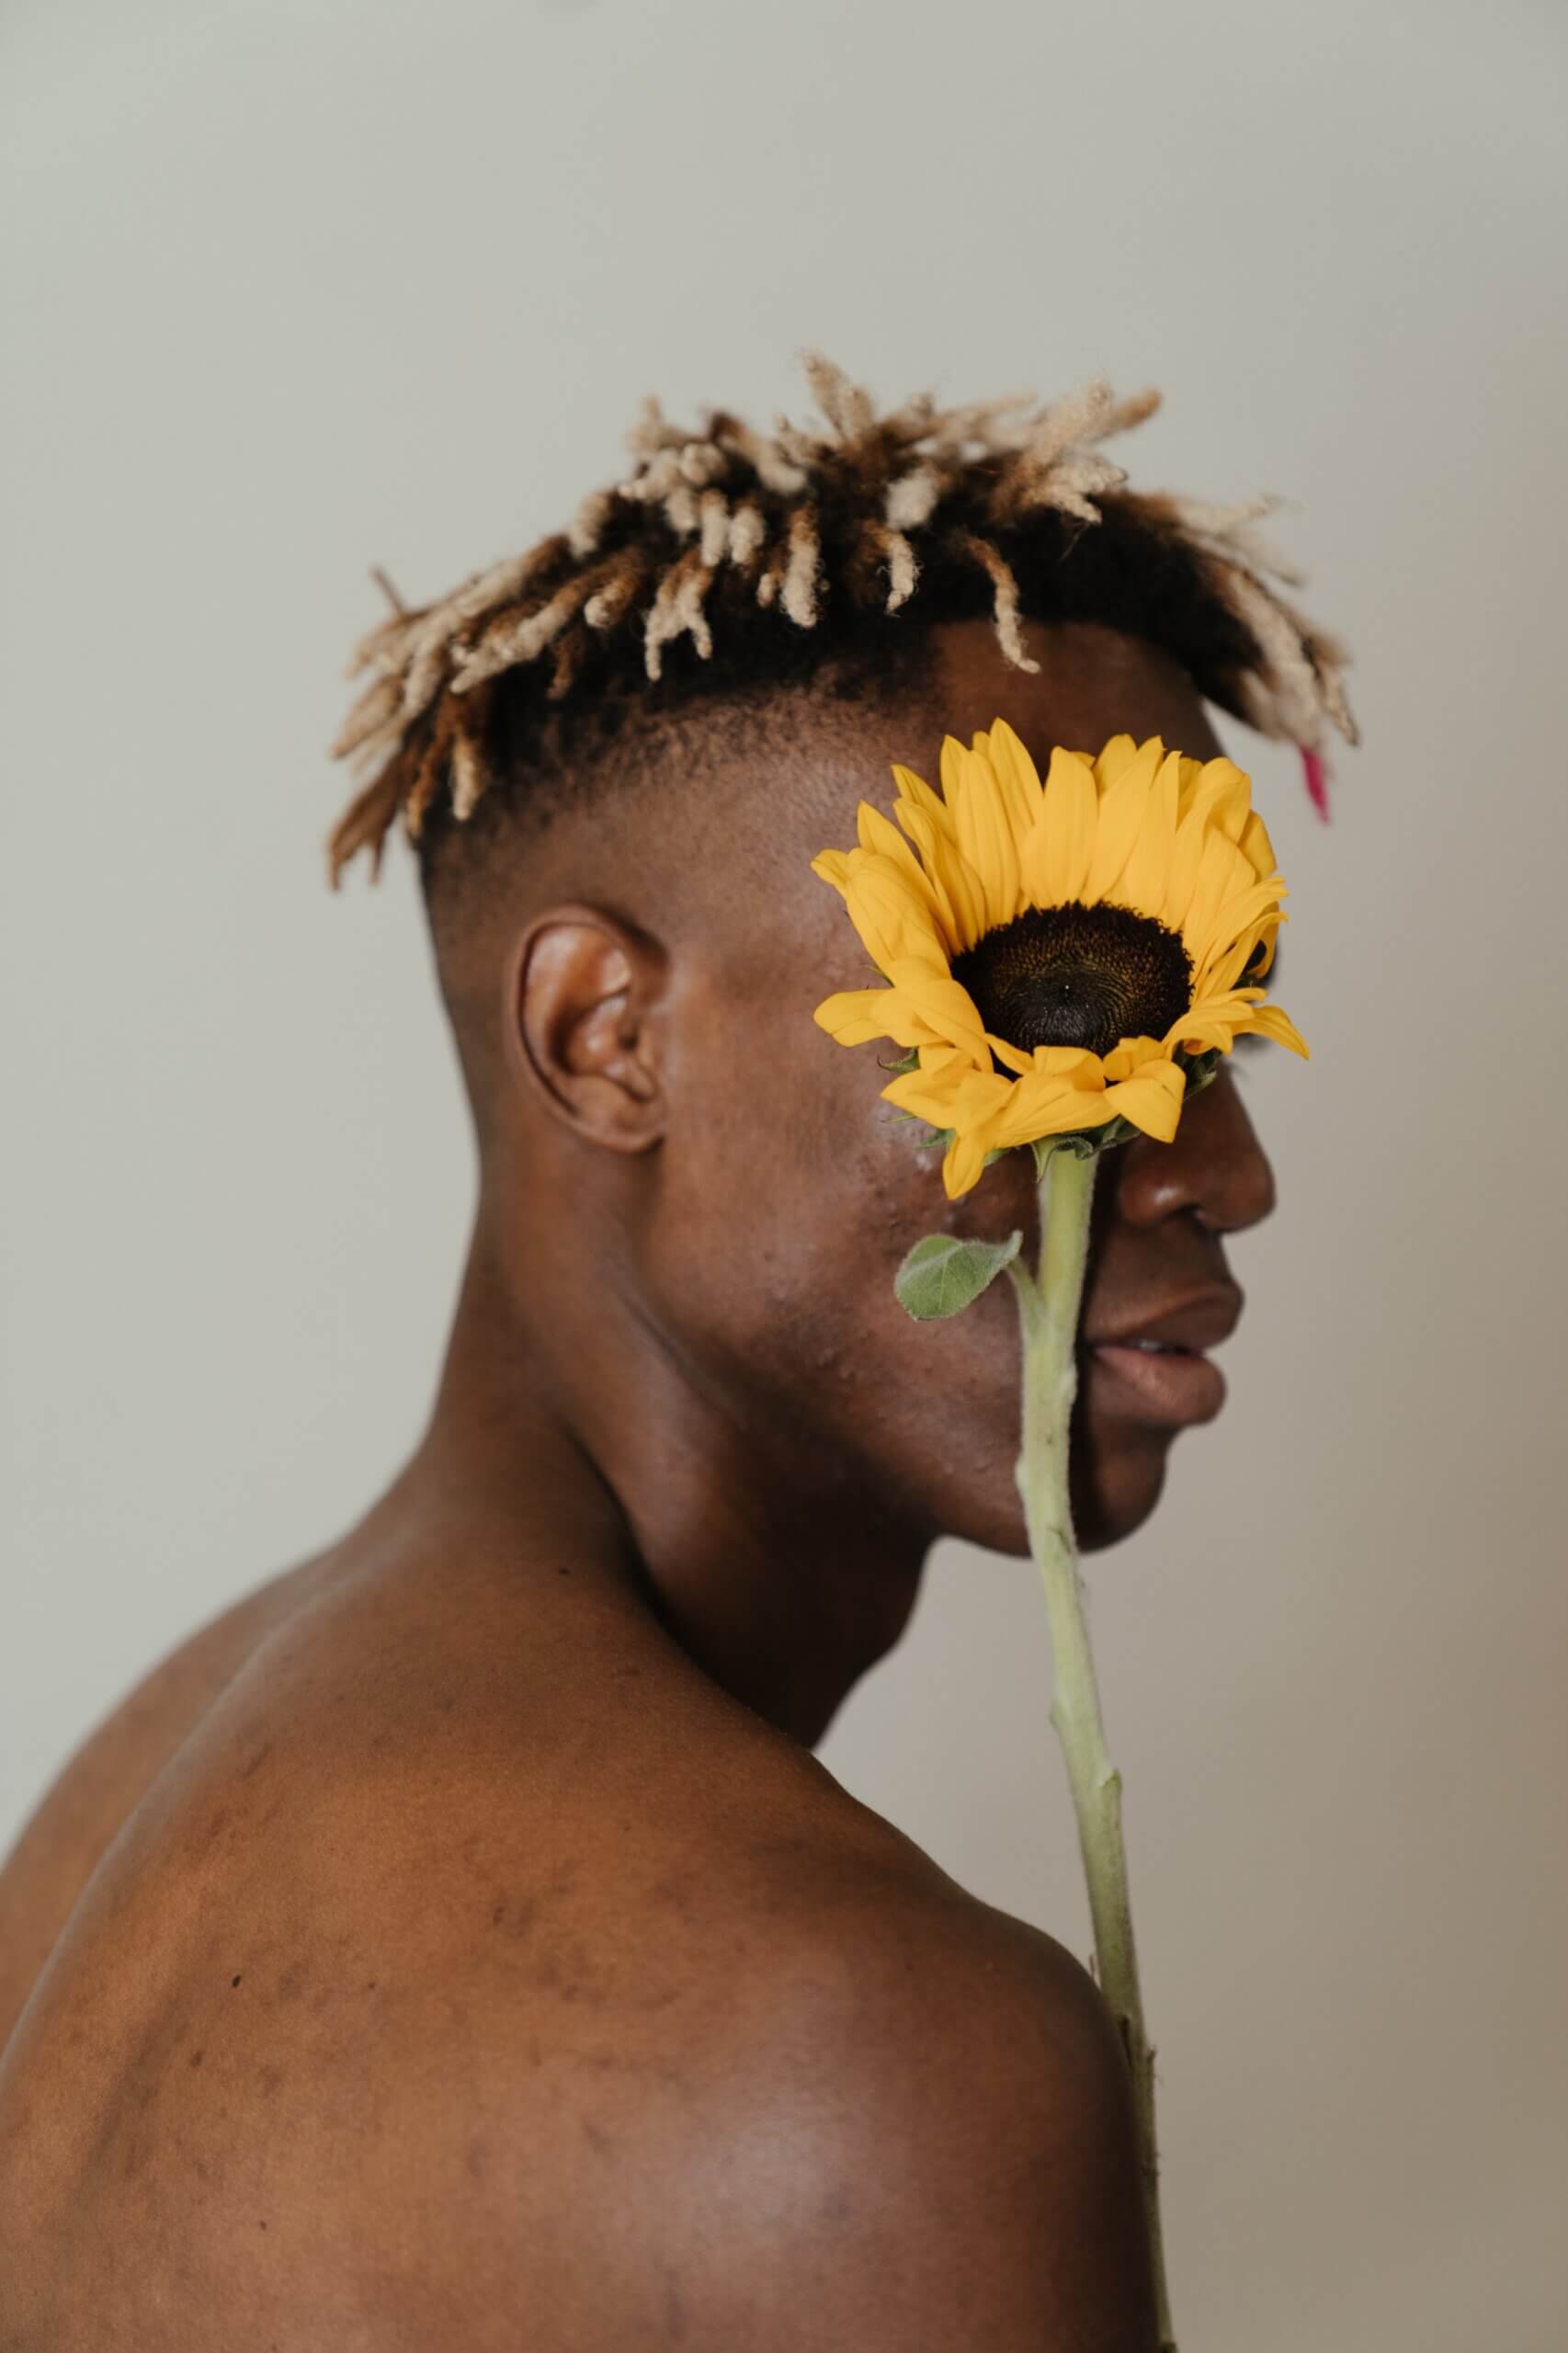 A man embracing acne with a sunflower